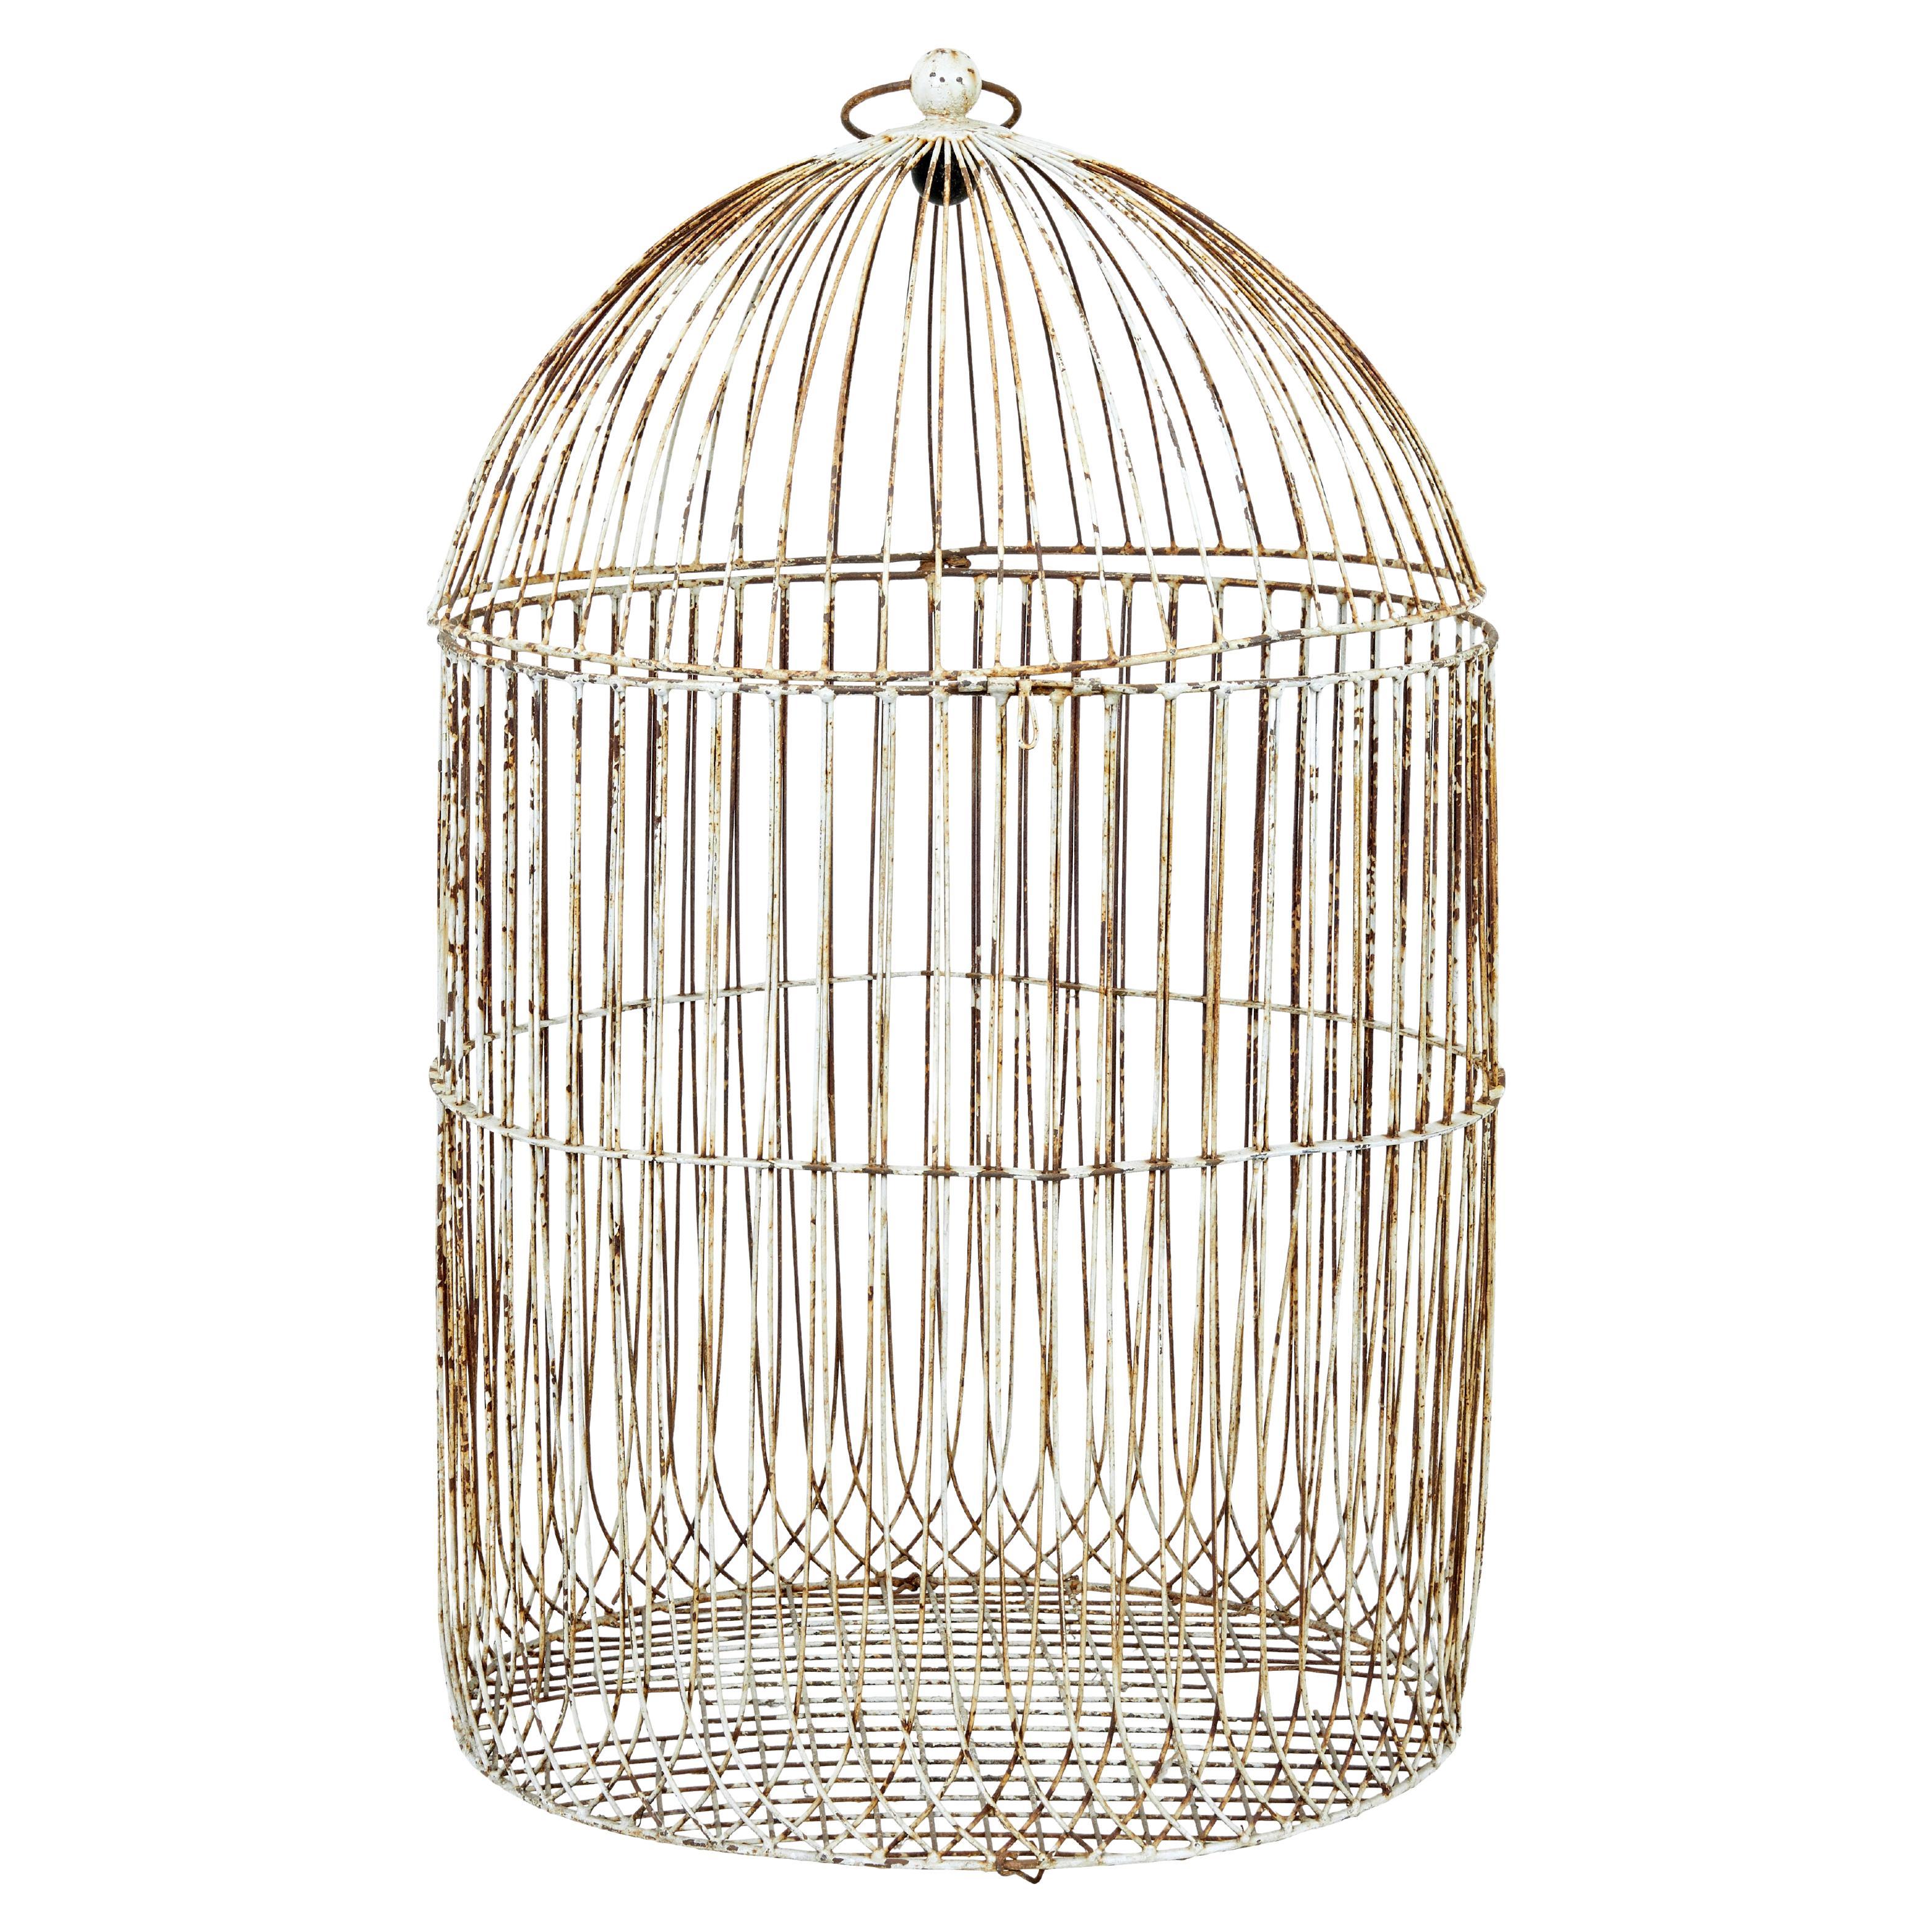 19th Century large wire frame decorative bird cage For Sale